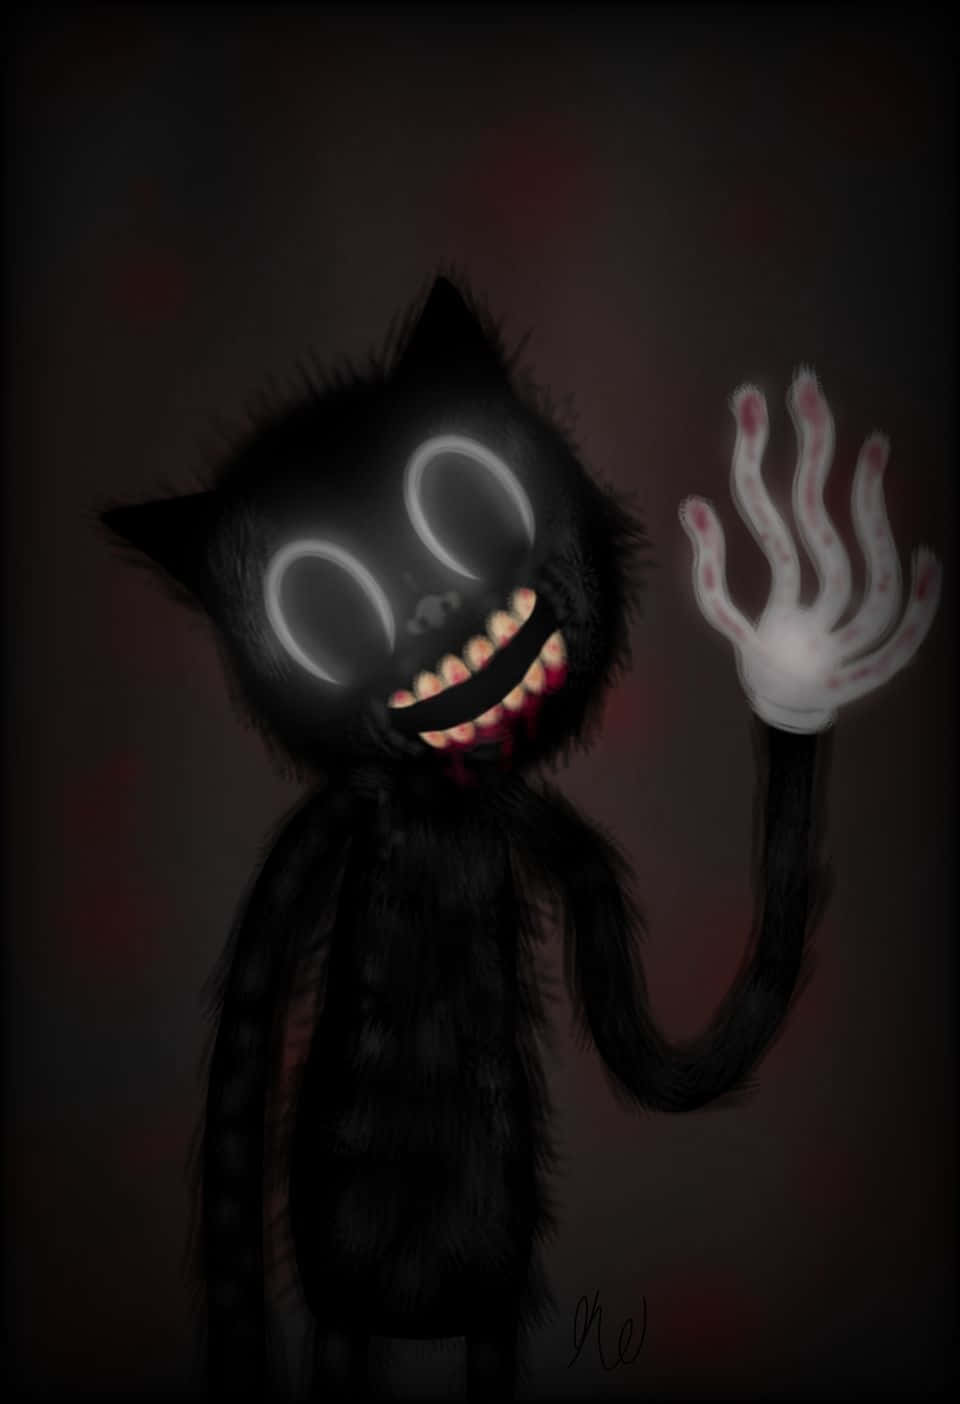 A Black Cat With A Glowing Hand